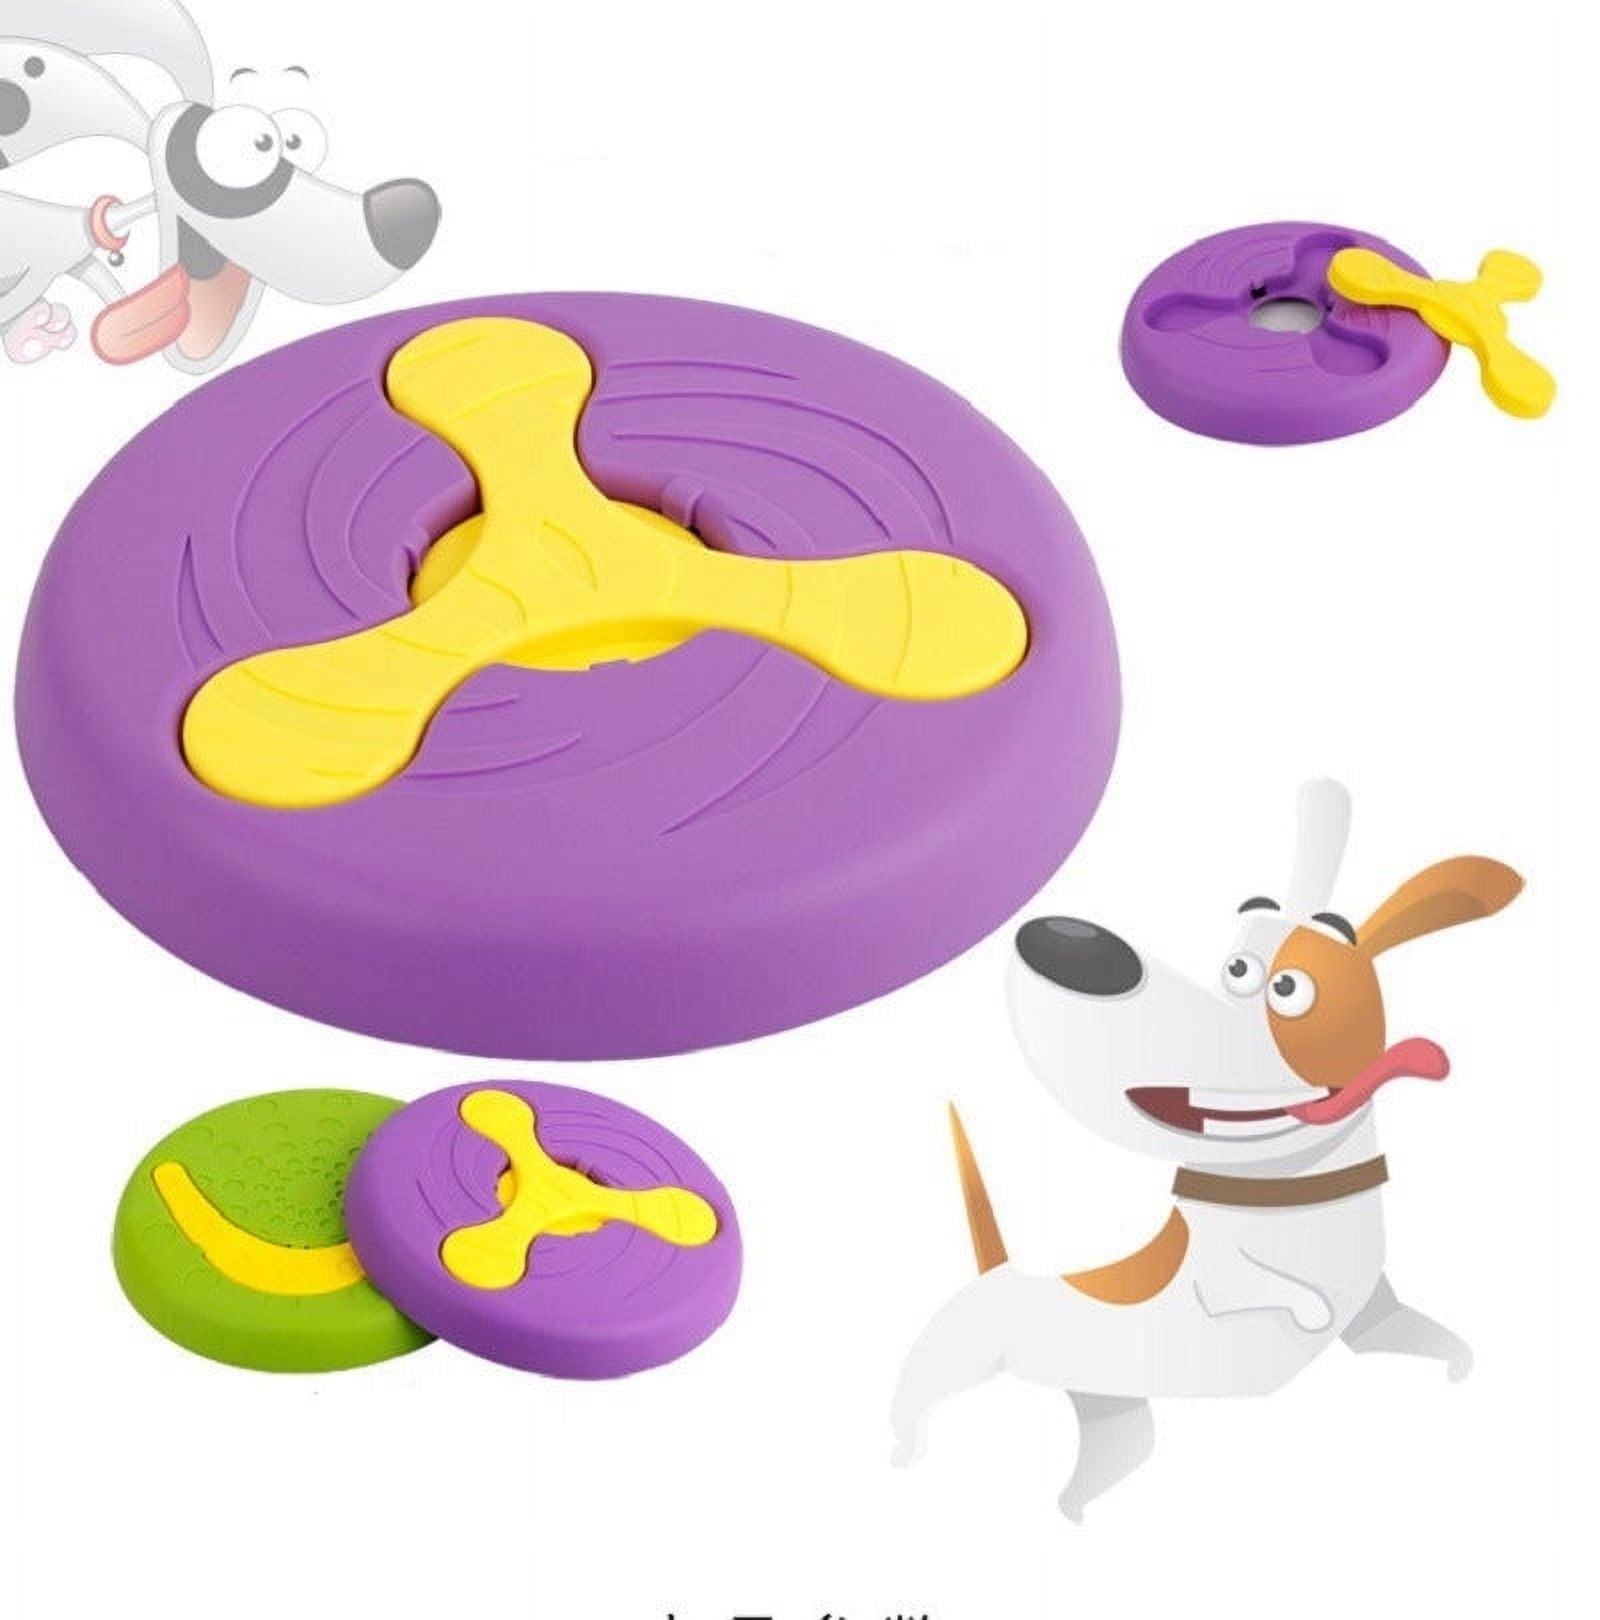 Bvrbaory 6 Pack Dog Flying Disc,Dogs Training Interactive Toys,Puppy Flyer Toy  Dog Flyer,Lightweight Soft Floating Saucer for Small Medium Dog Outdoor  Sport,Safe on Teeth - Yahoo Shopping